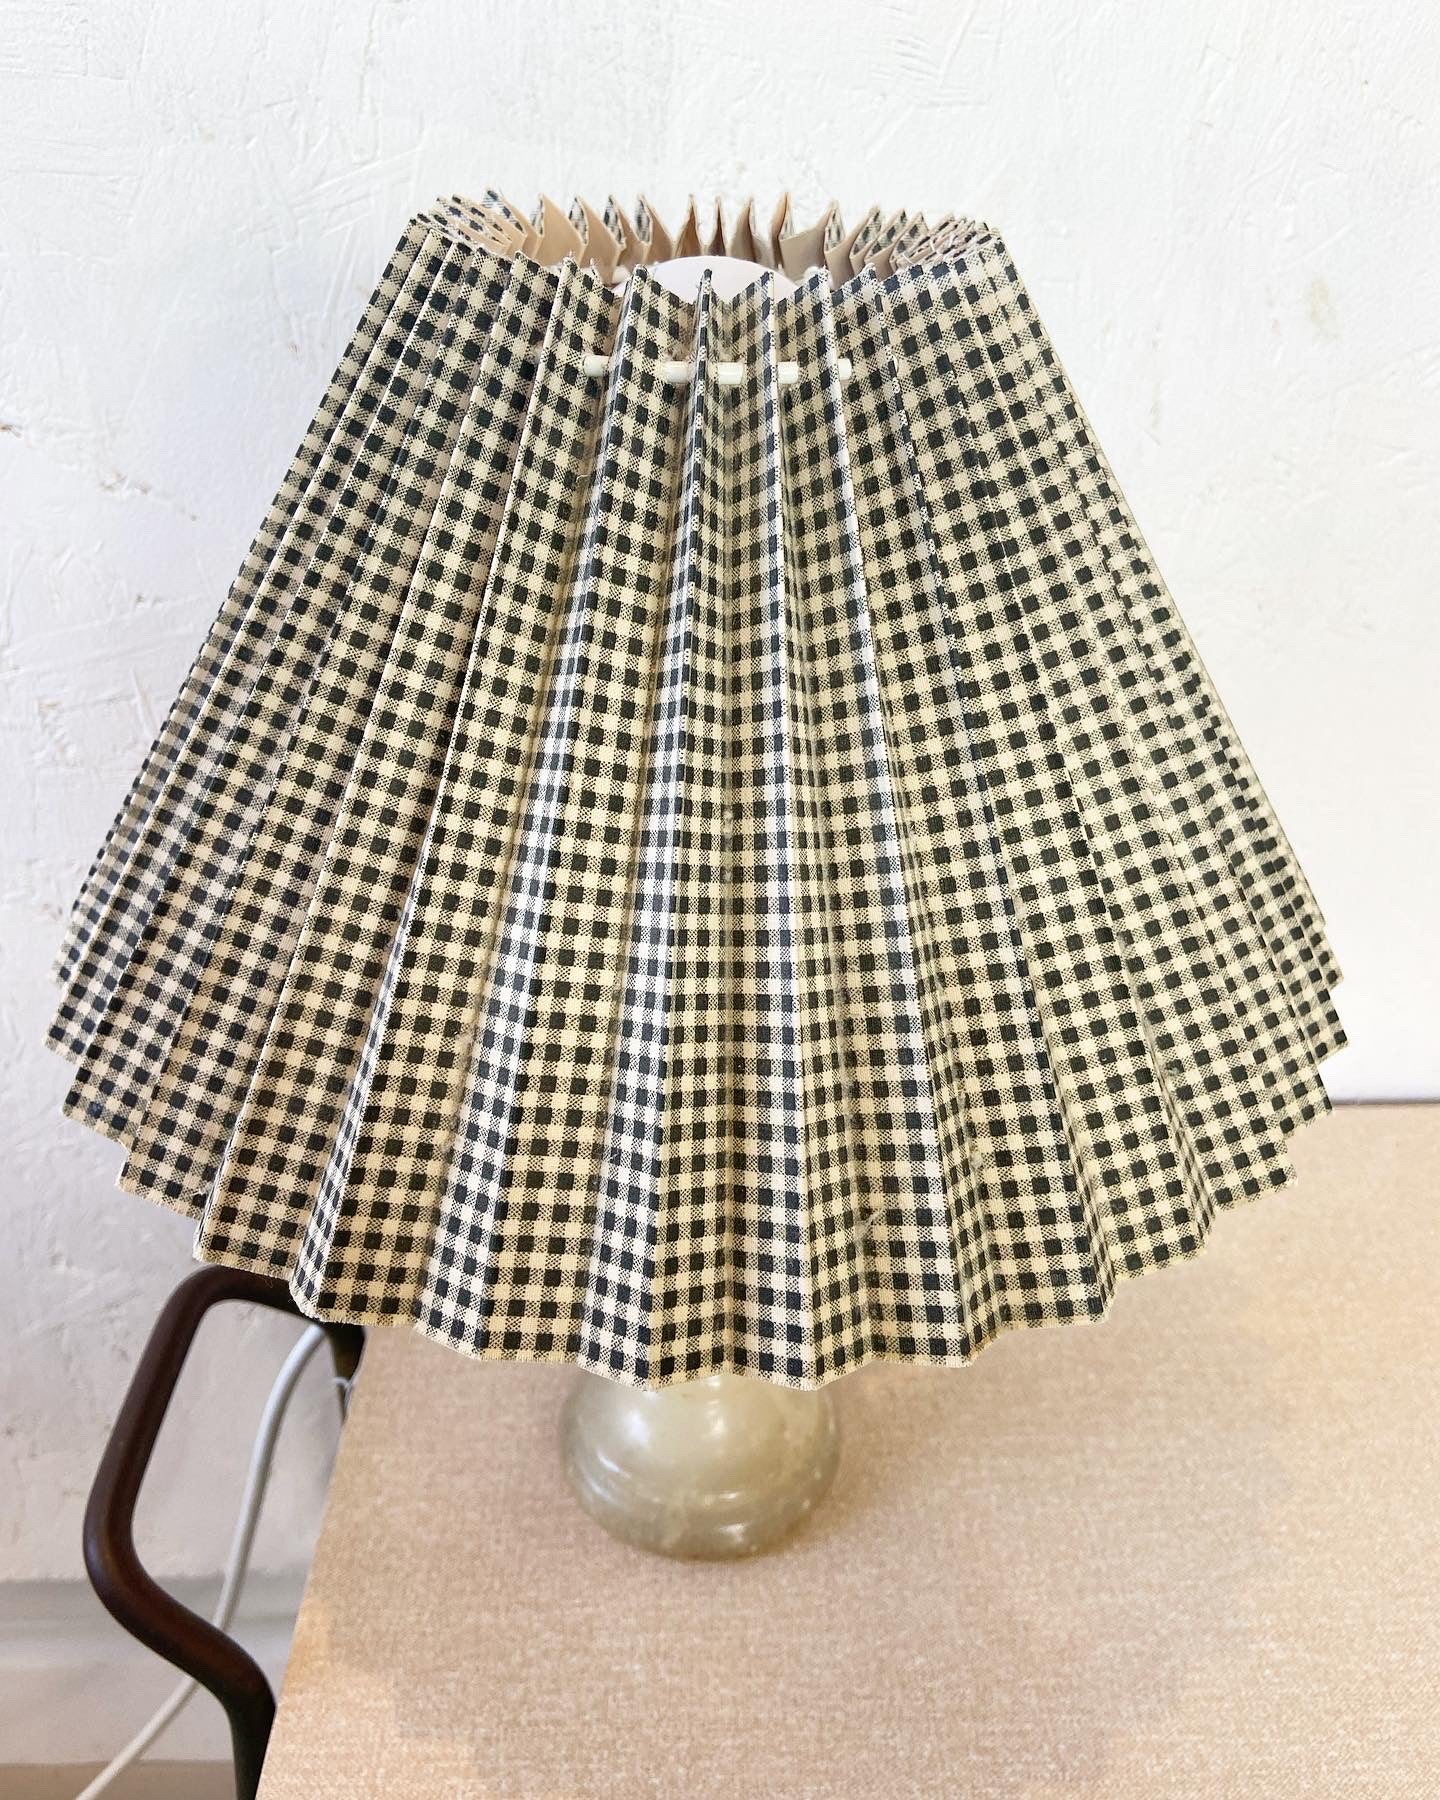 Onyx Table Lamp with Green Gingham Shade